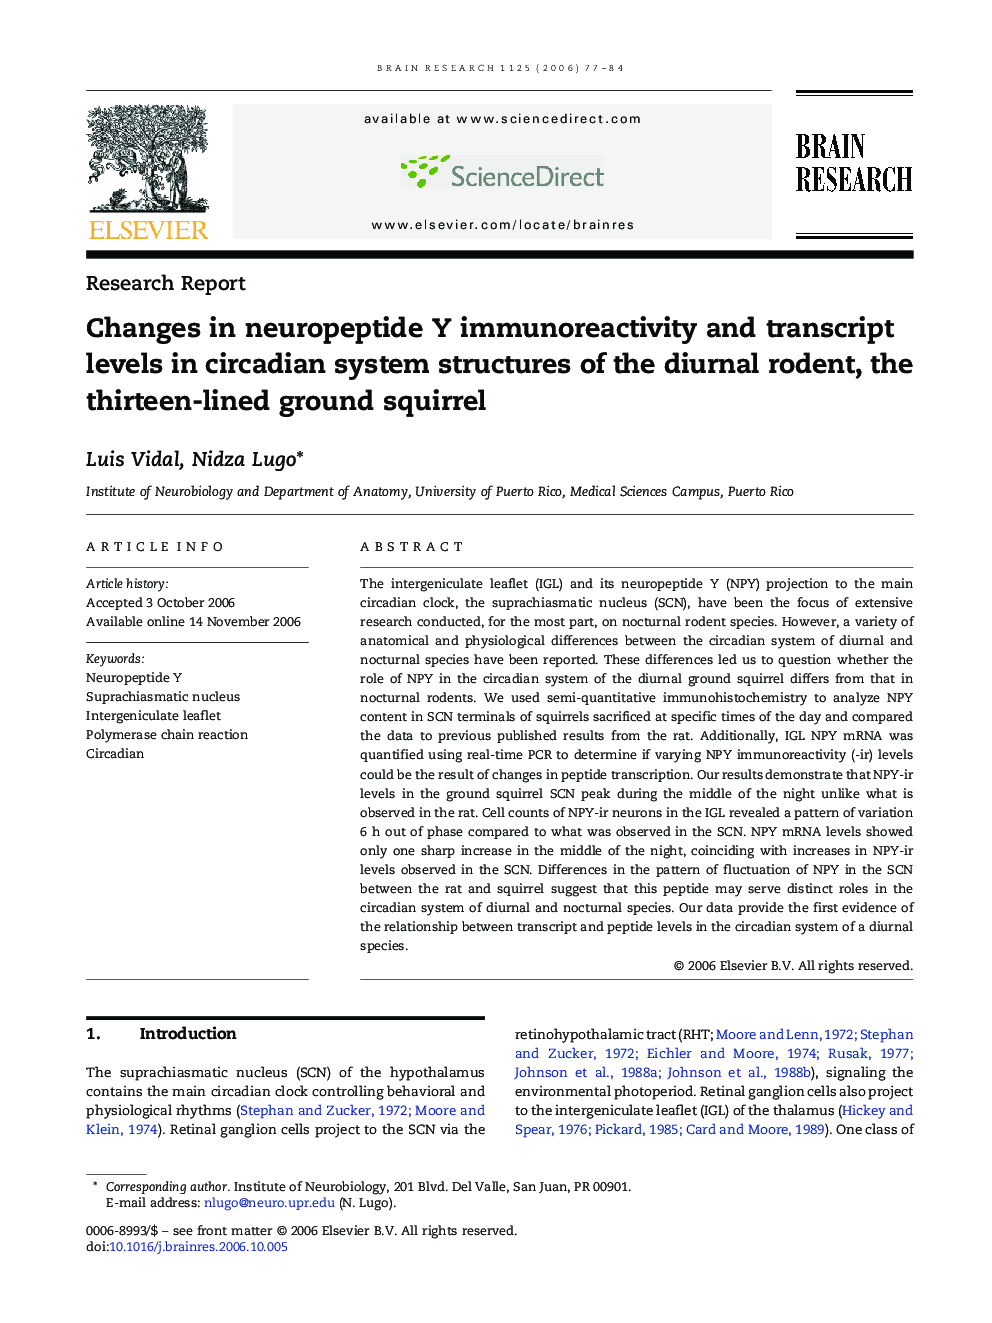 Changes in neuropeptide Y immunoreactivity and transcript levels in circadian system structures of the diurnal rodent, the thirteen-lined ground squirrel